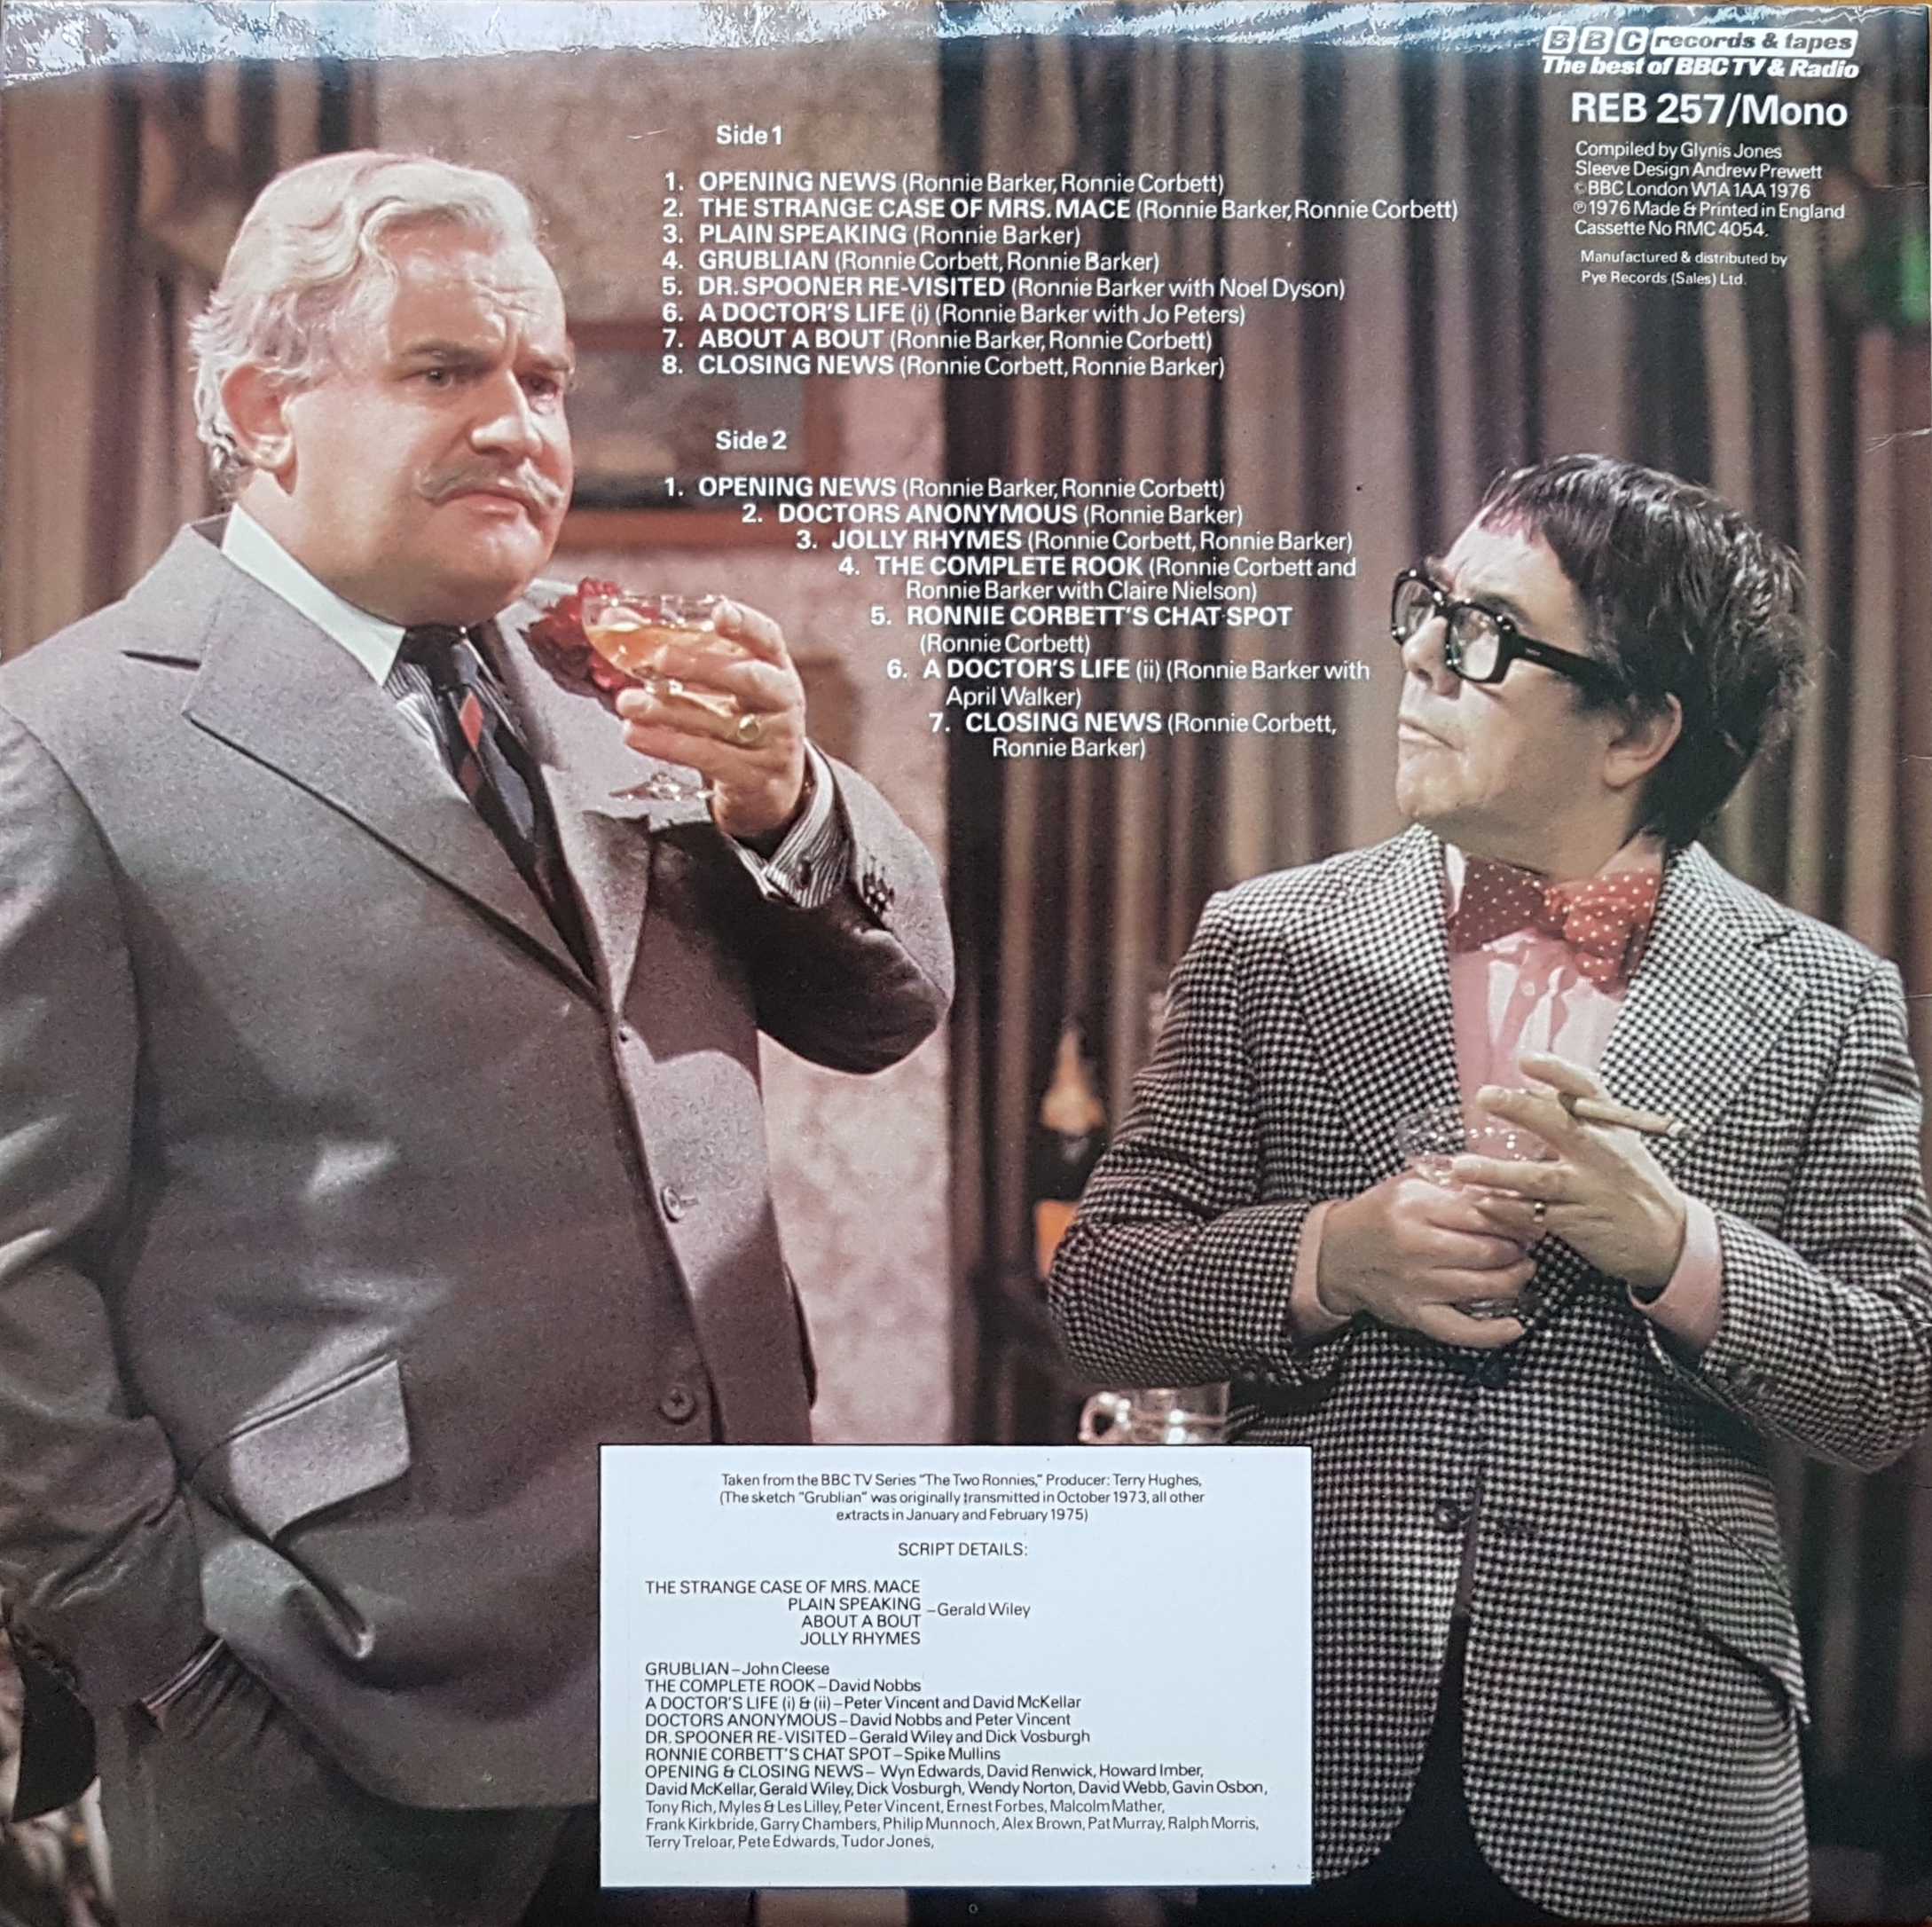 Picture of REB 257 The two Ronnies by artist Various from the BBC records and Tapes library